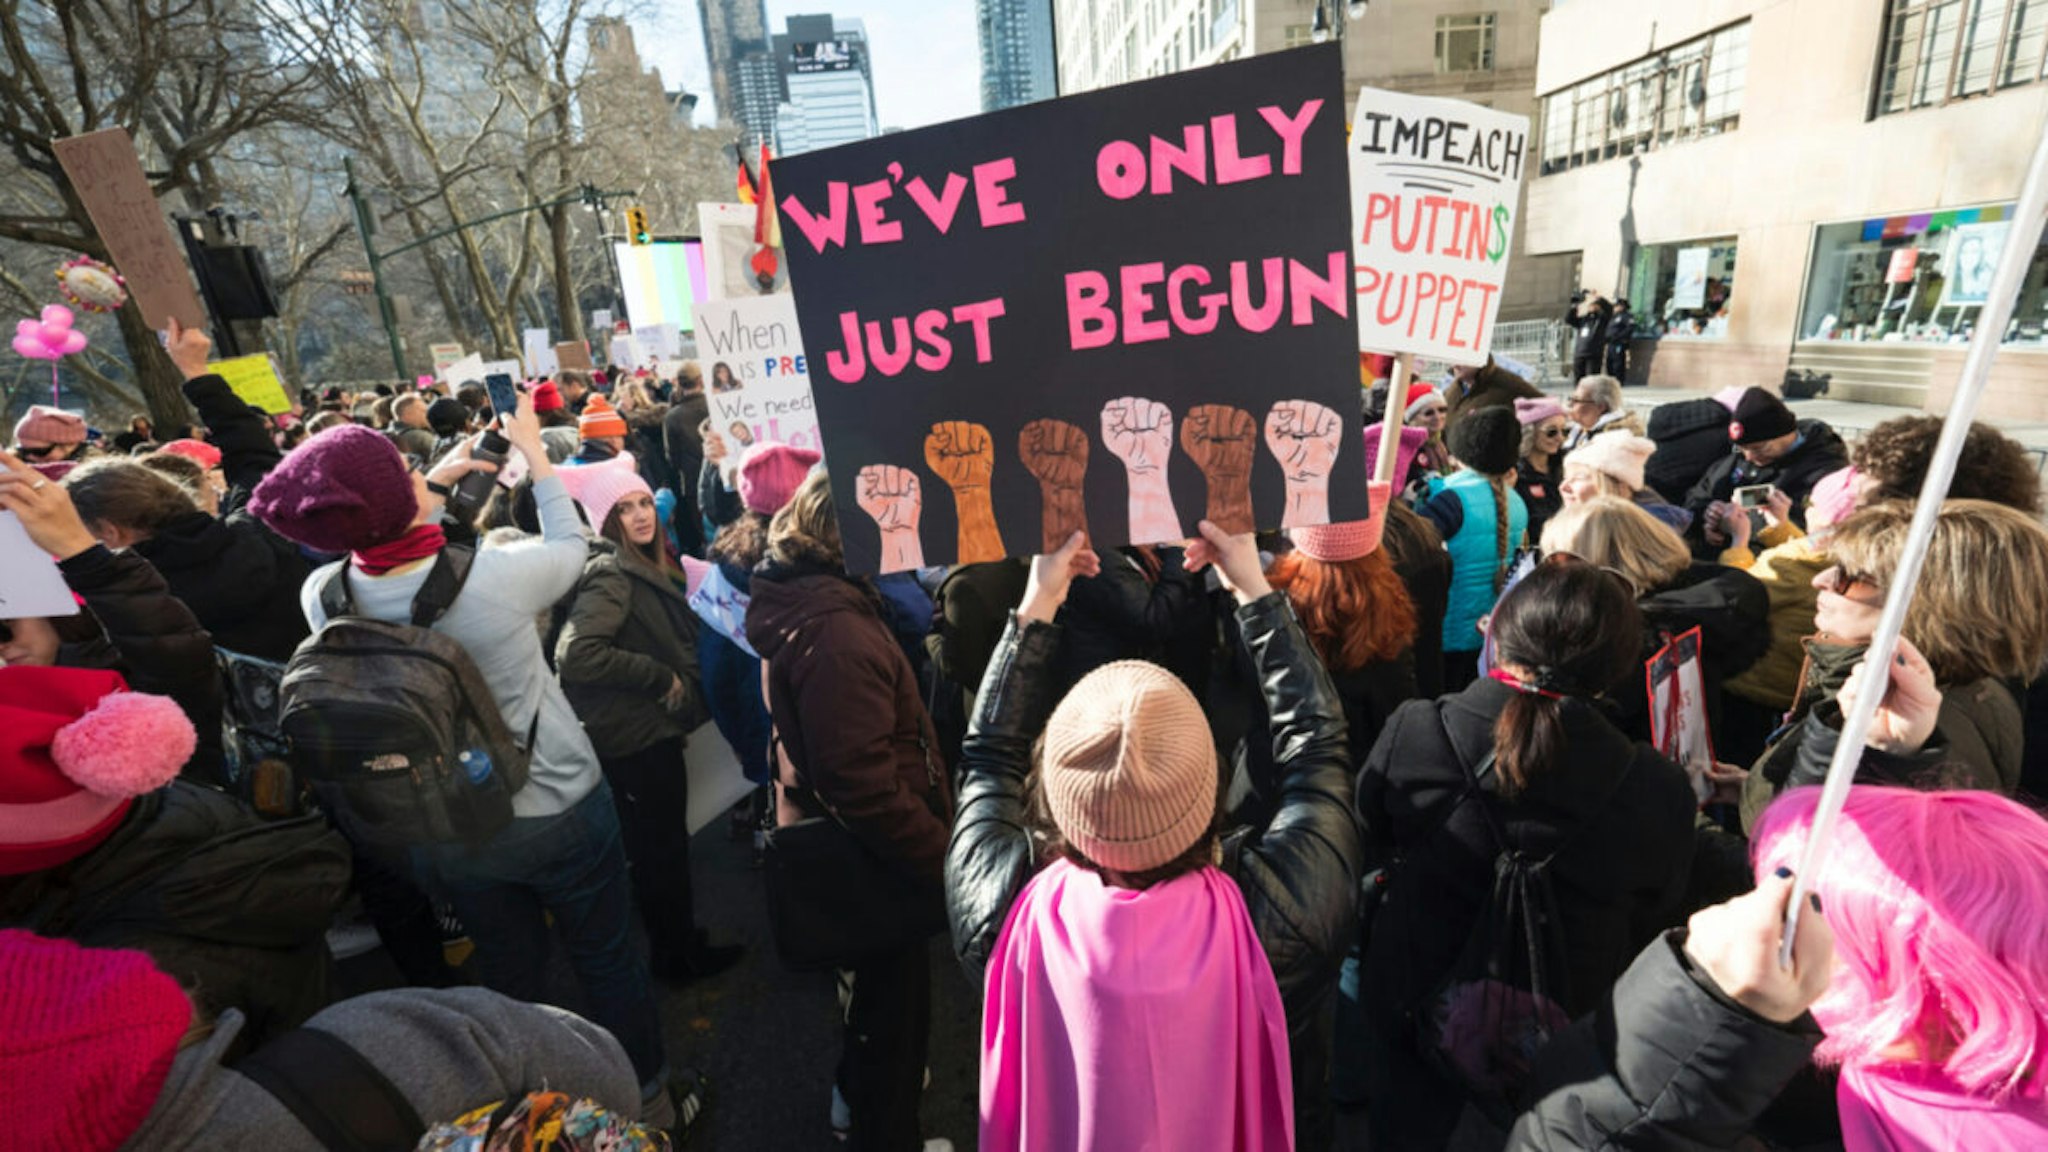 A demonstrator holds up a banner saying "We've Only Just Begun" during the second annual Women's March in the borough of Manhattan in New York City, U.S. on Saturday, January 20, 2018.